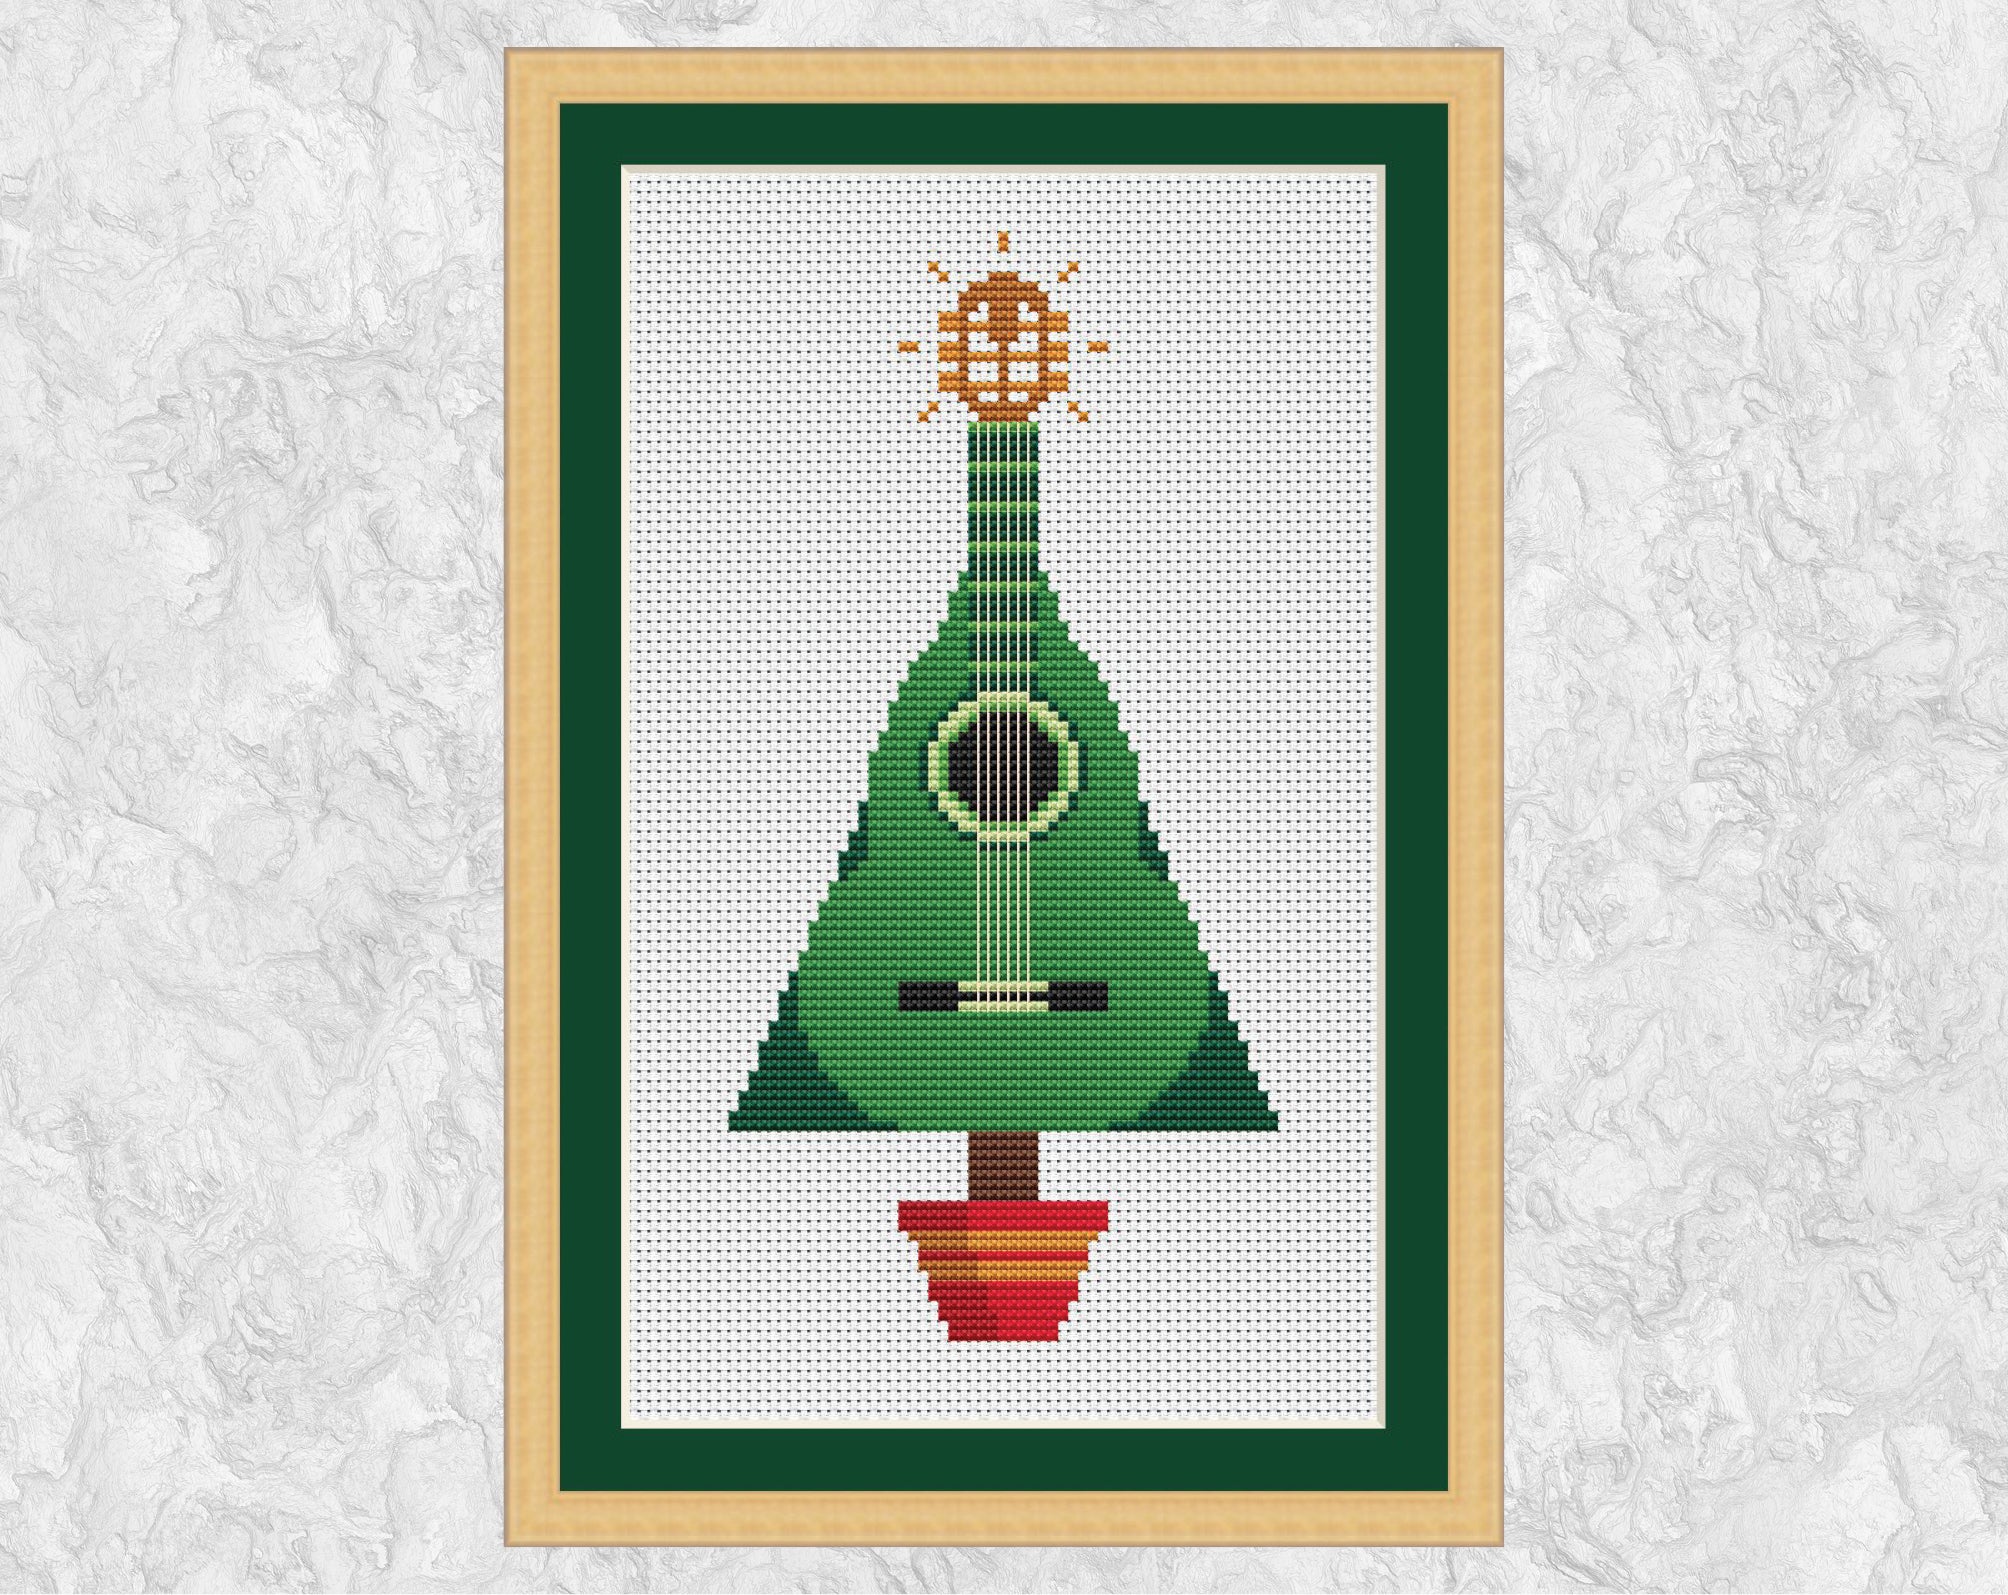 Guitar Christmas Tree cross stitch pattern. Shown in frame.